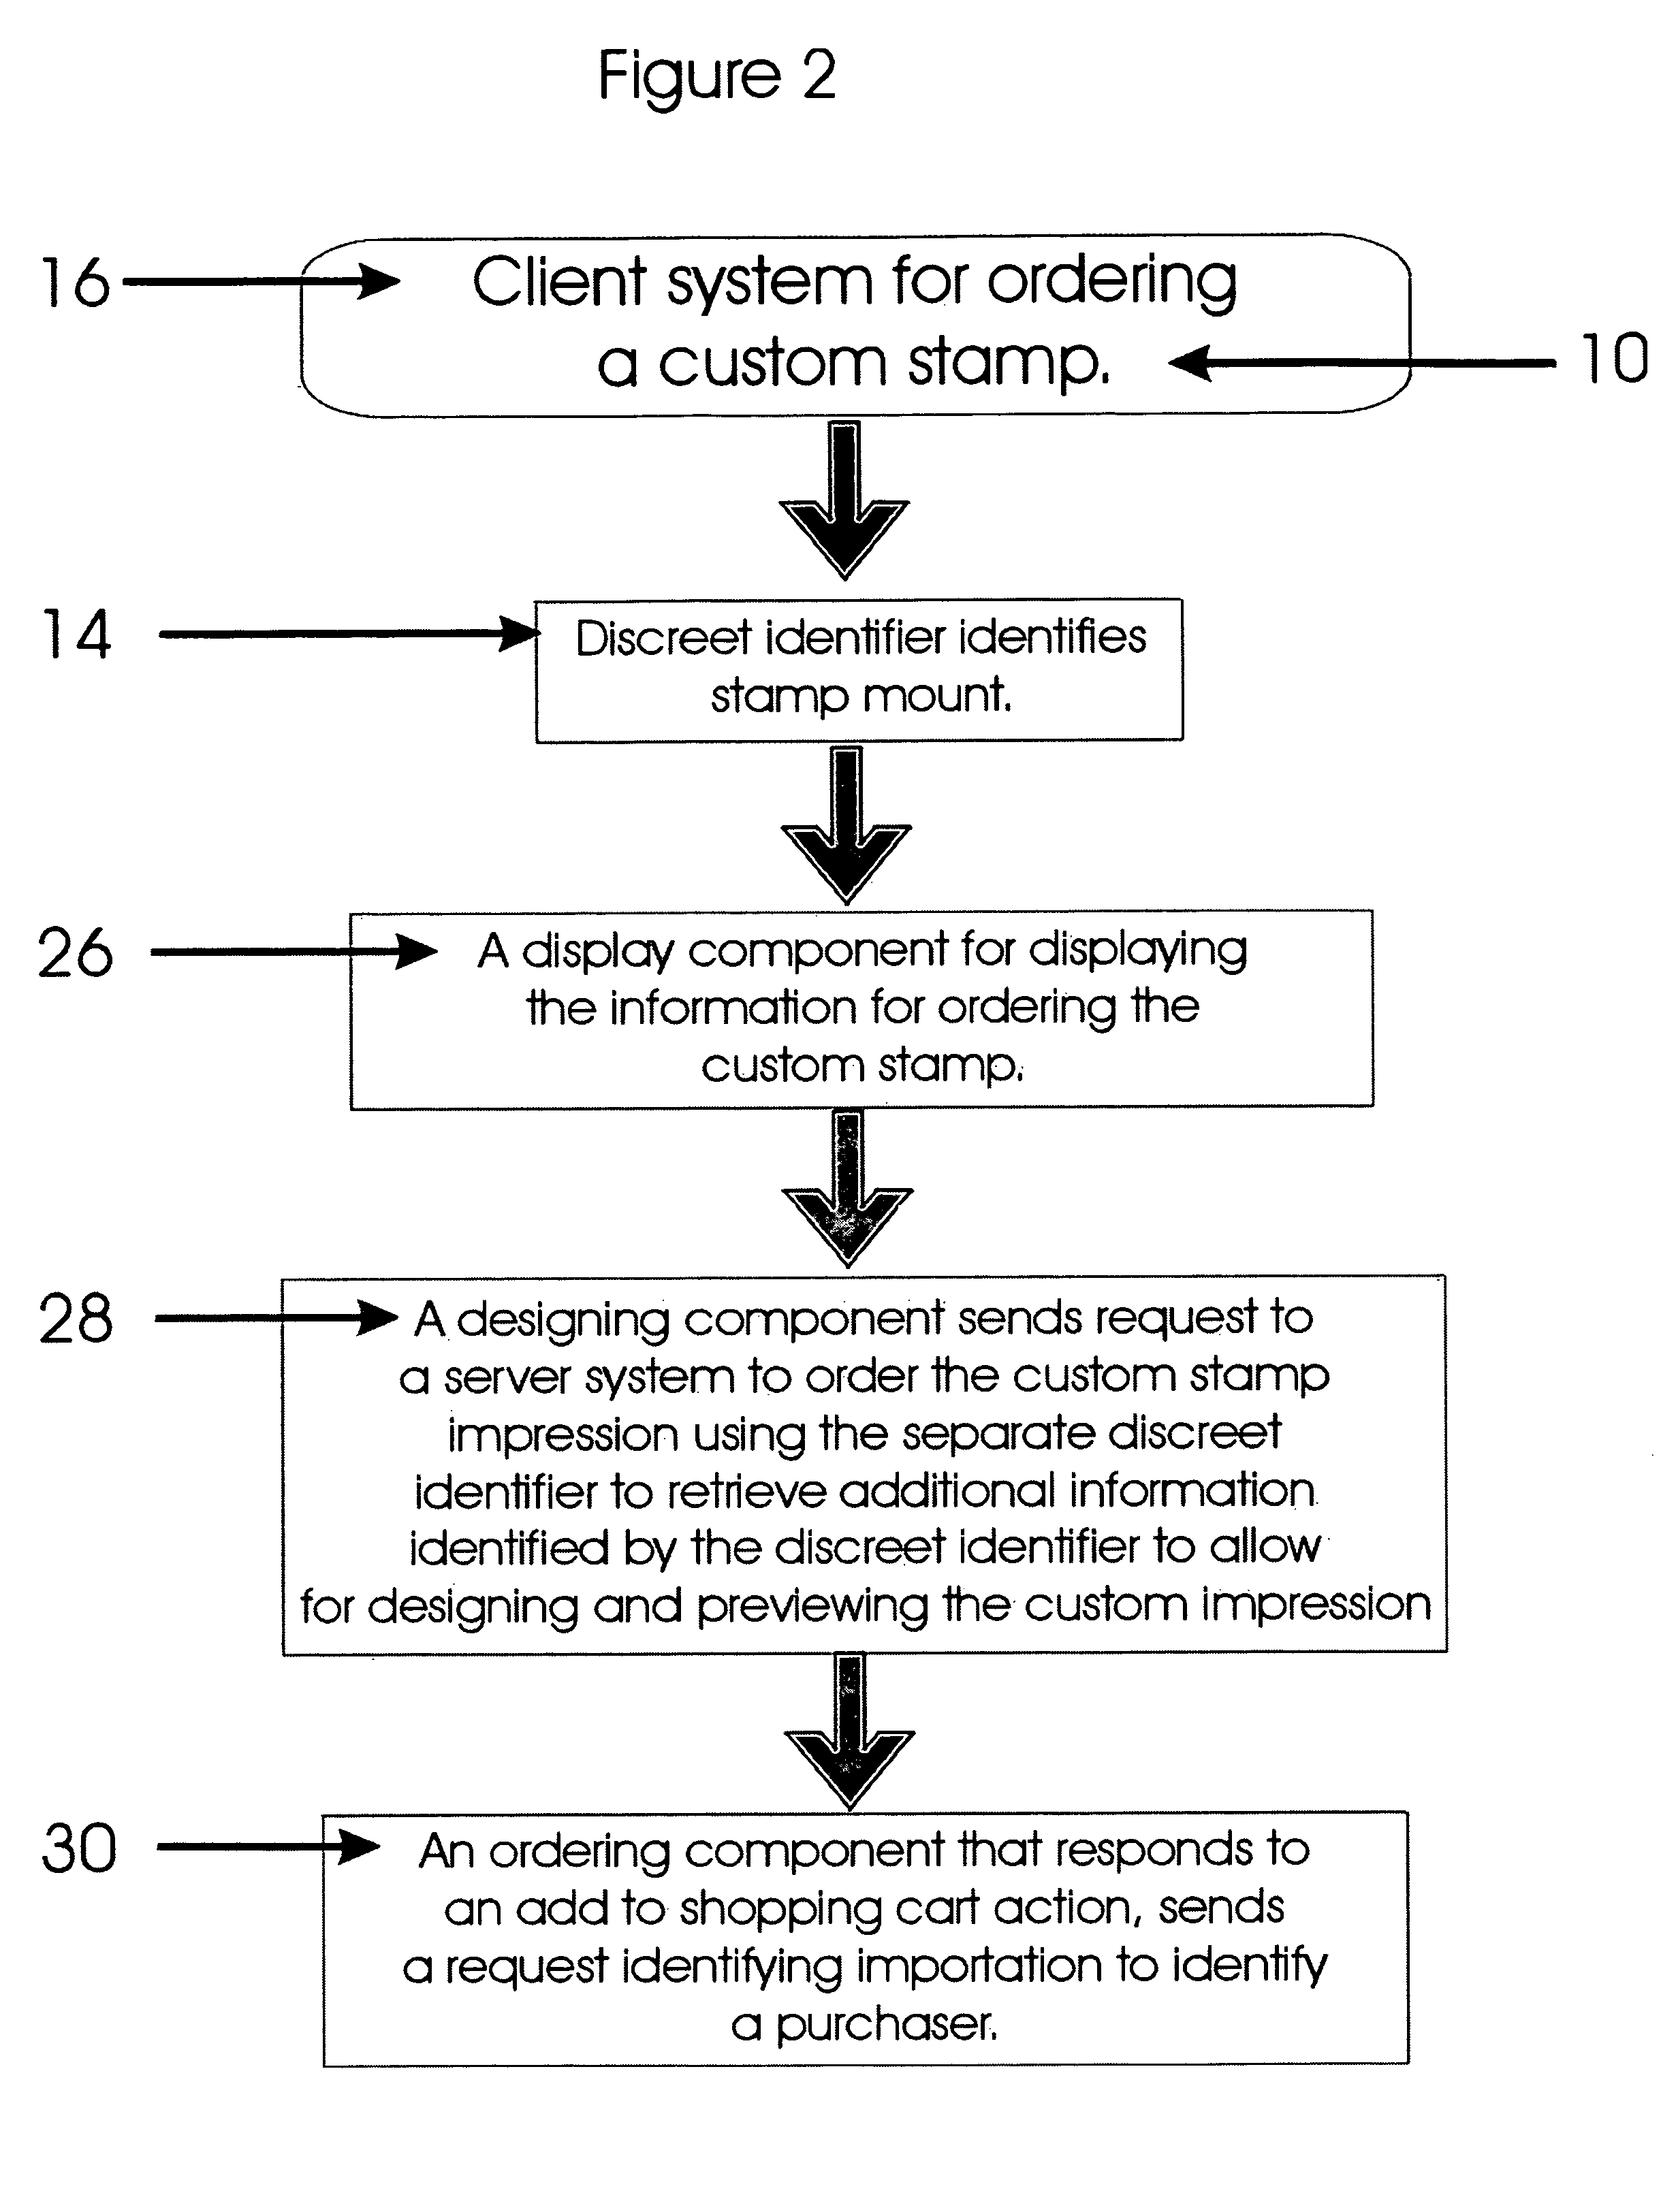 Method and system of placing an order for a custom stamp using an identifier